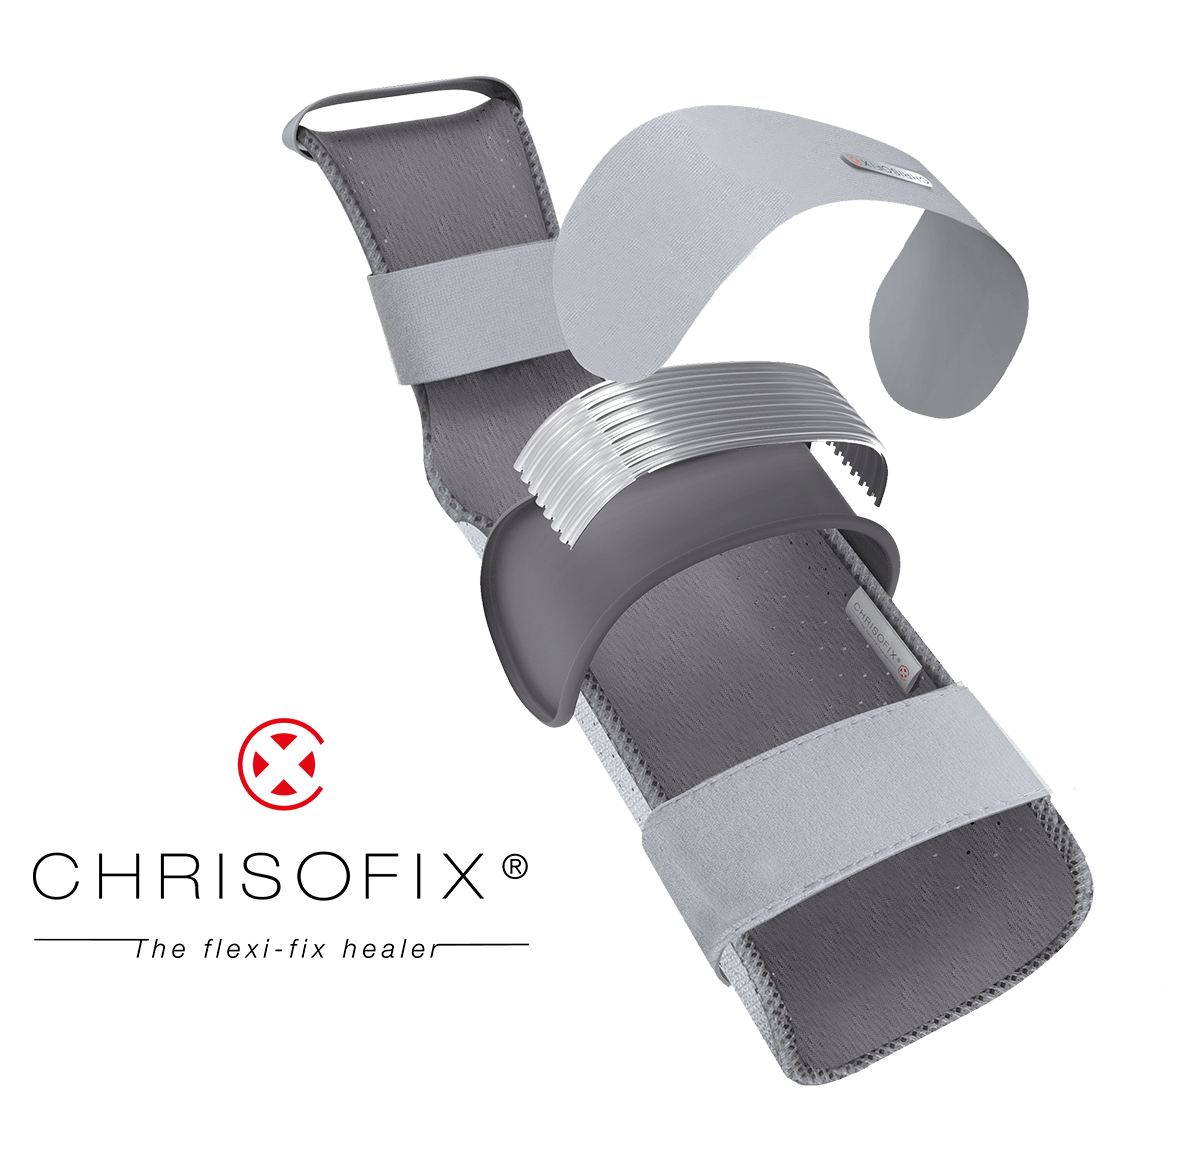 Chrisofix - World-class Orthoses Developed and Patented in Switzerland